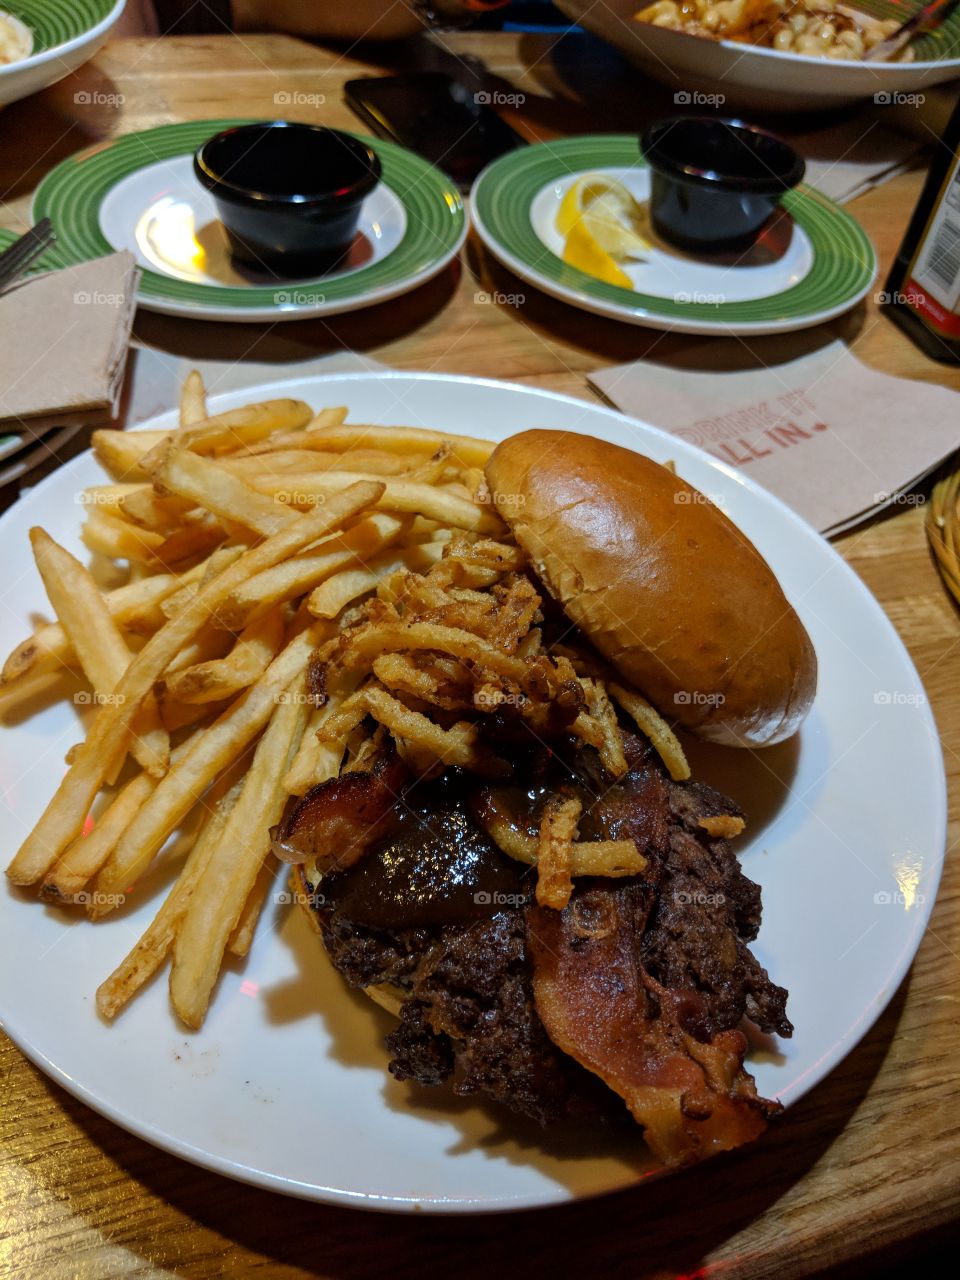 Sloppy Burger and Fries